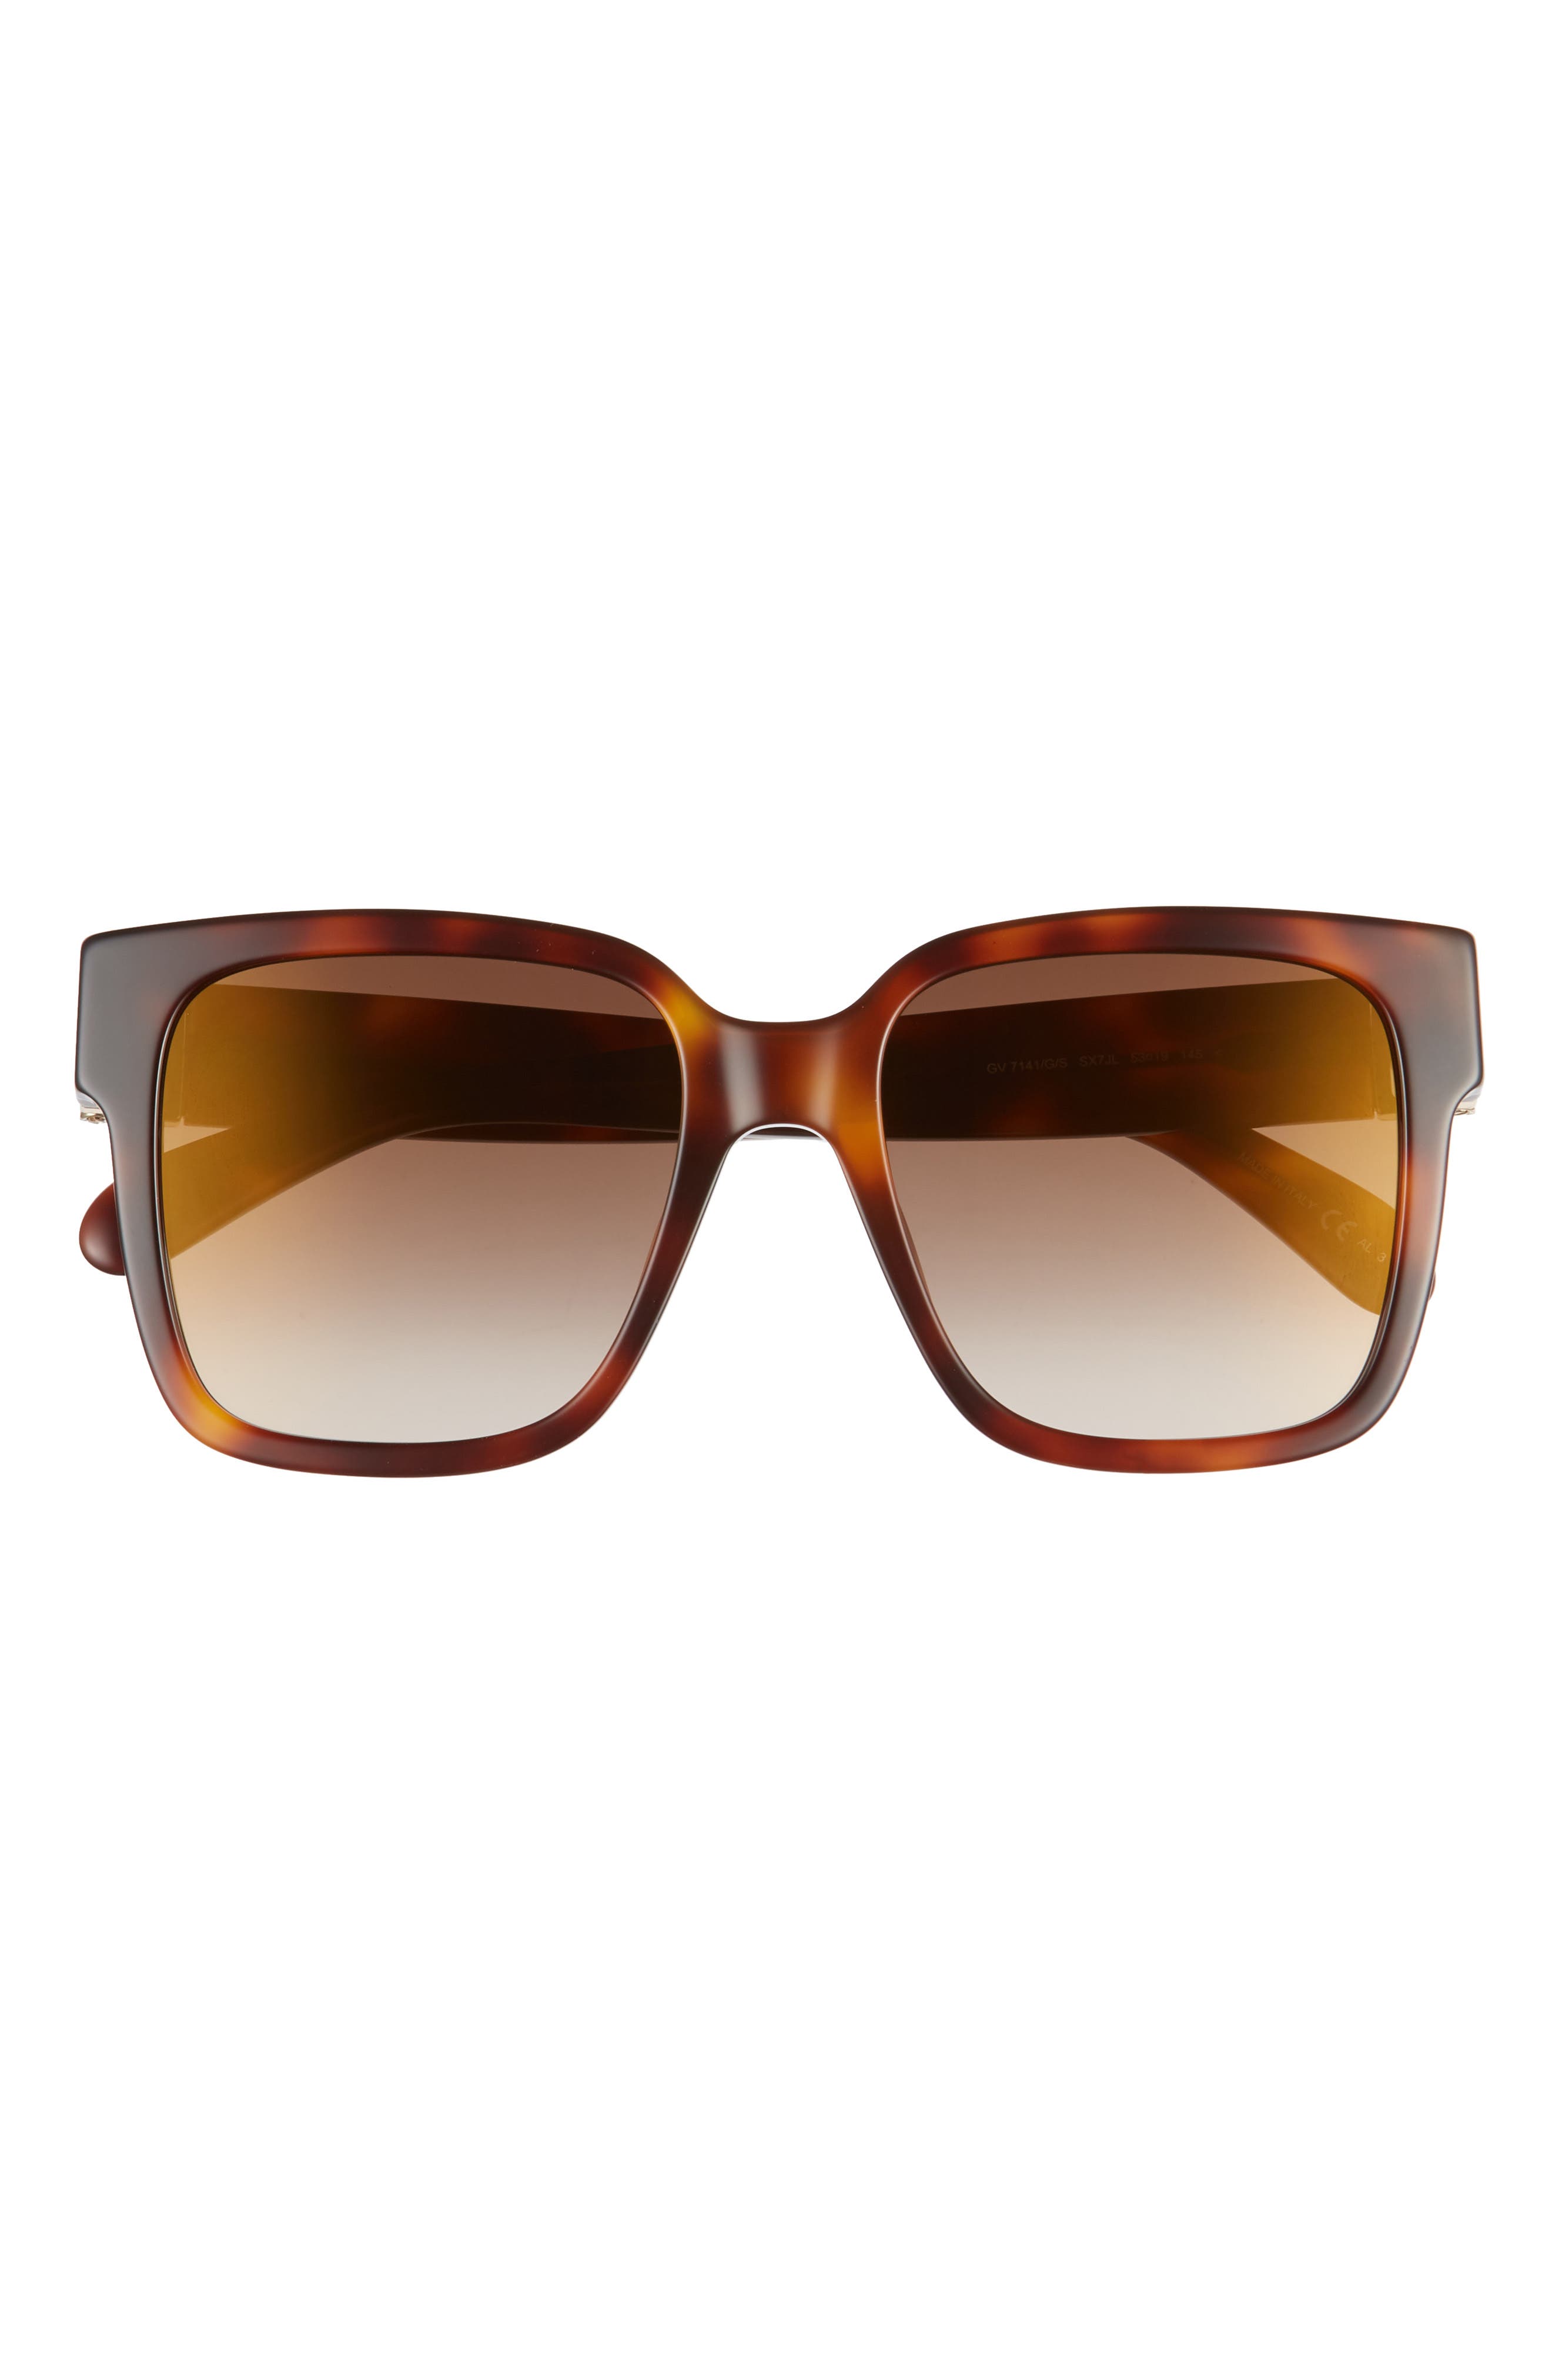 givenchy sunglasses nordstrom